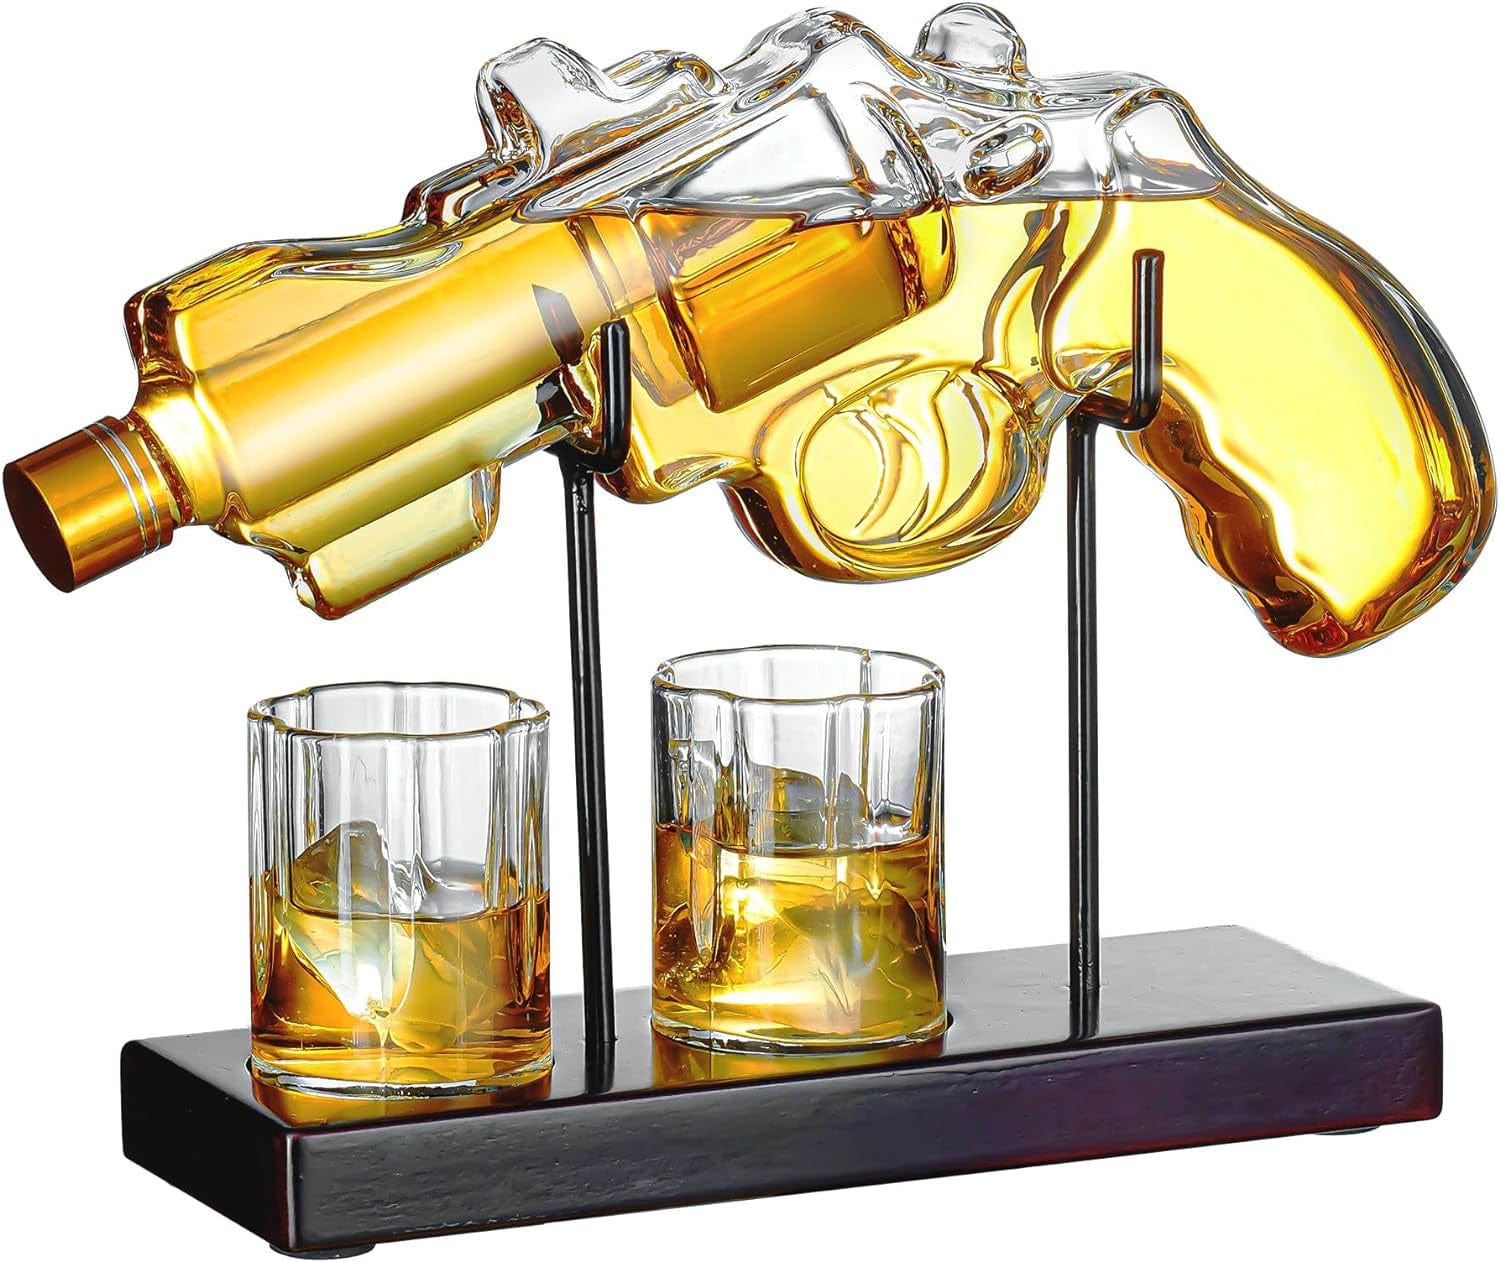 GeckoCustom Gifts for Men Dad,  9 Oz Whiskey Gun Decanter Set with Glasses, Unique Dad Birthday Gift Ideas from Daughter Son, Retirement Bar Stuff Gift for Father Him Brother,Cool Dispenser for Liquor Vodka